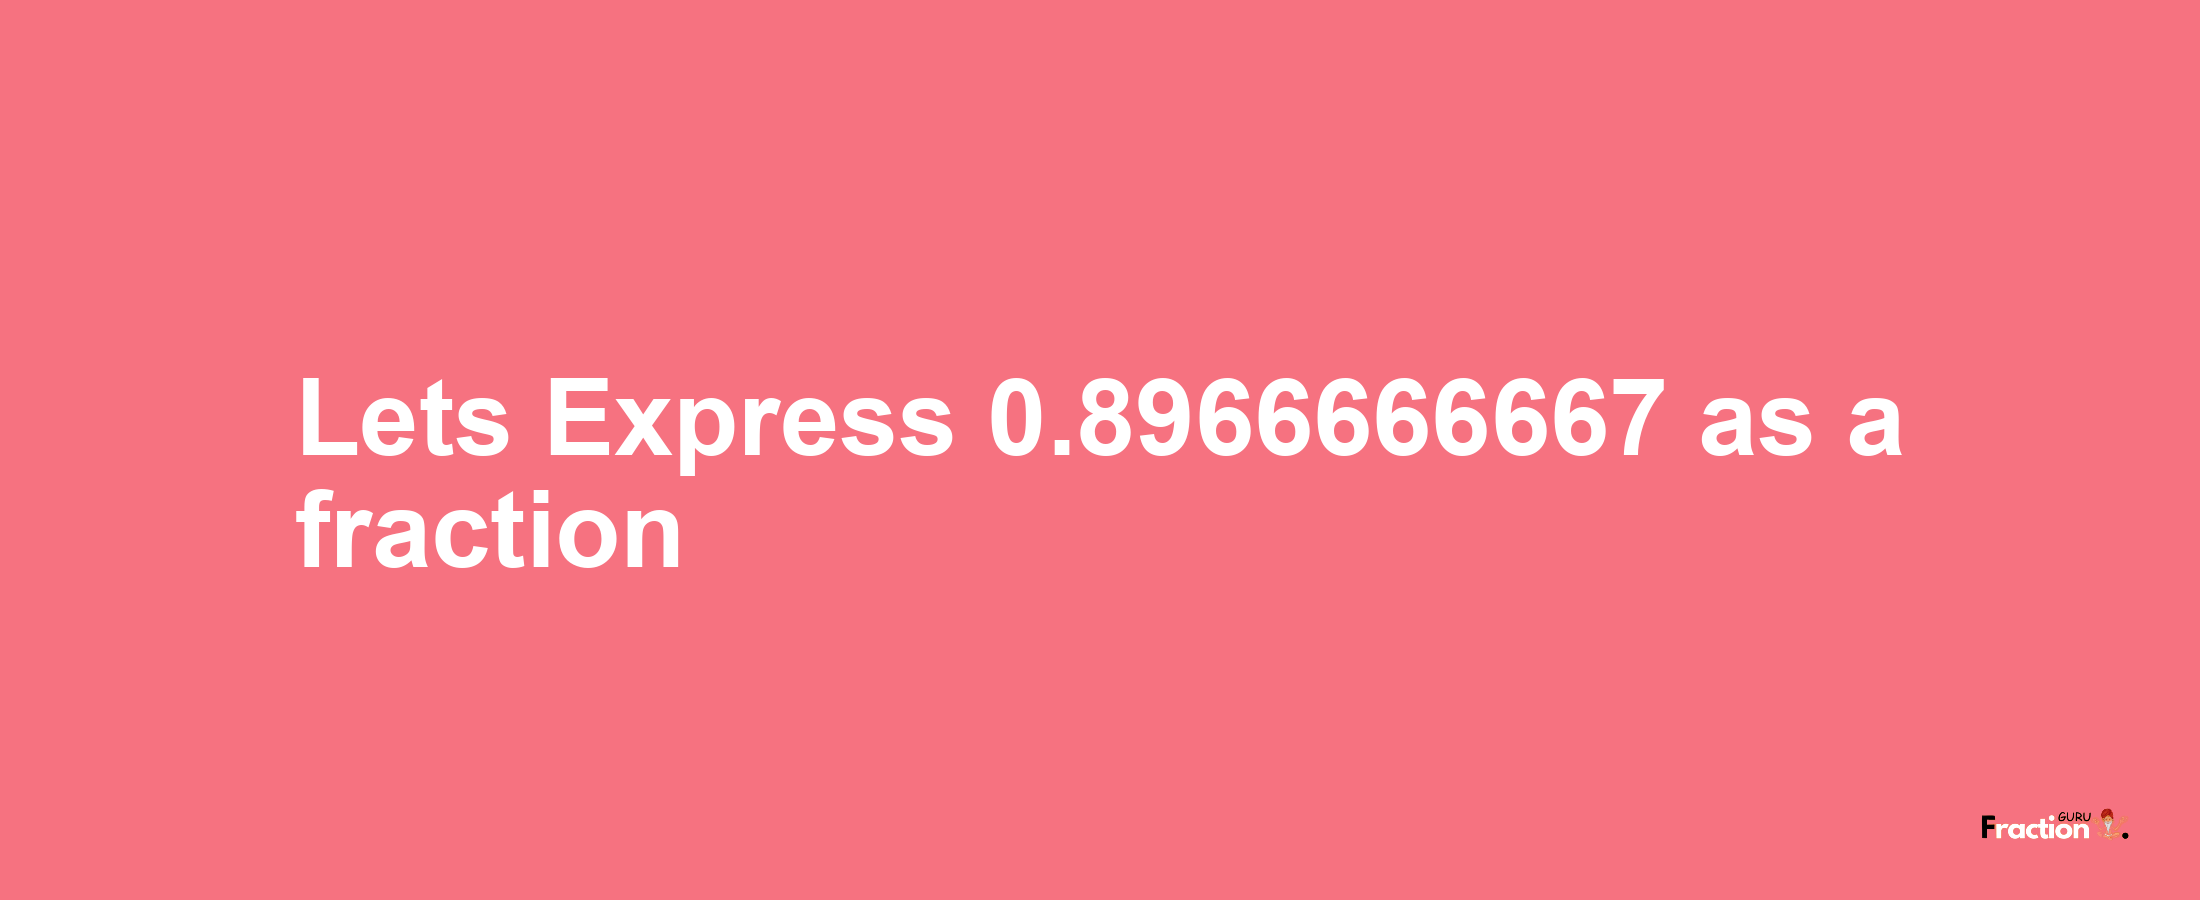 Lets Express 0.8966666667 as afraction